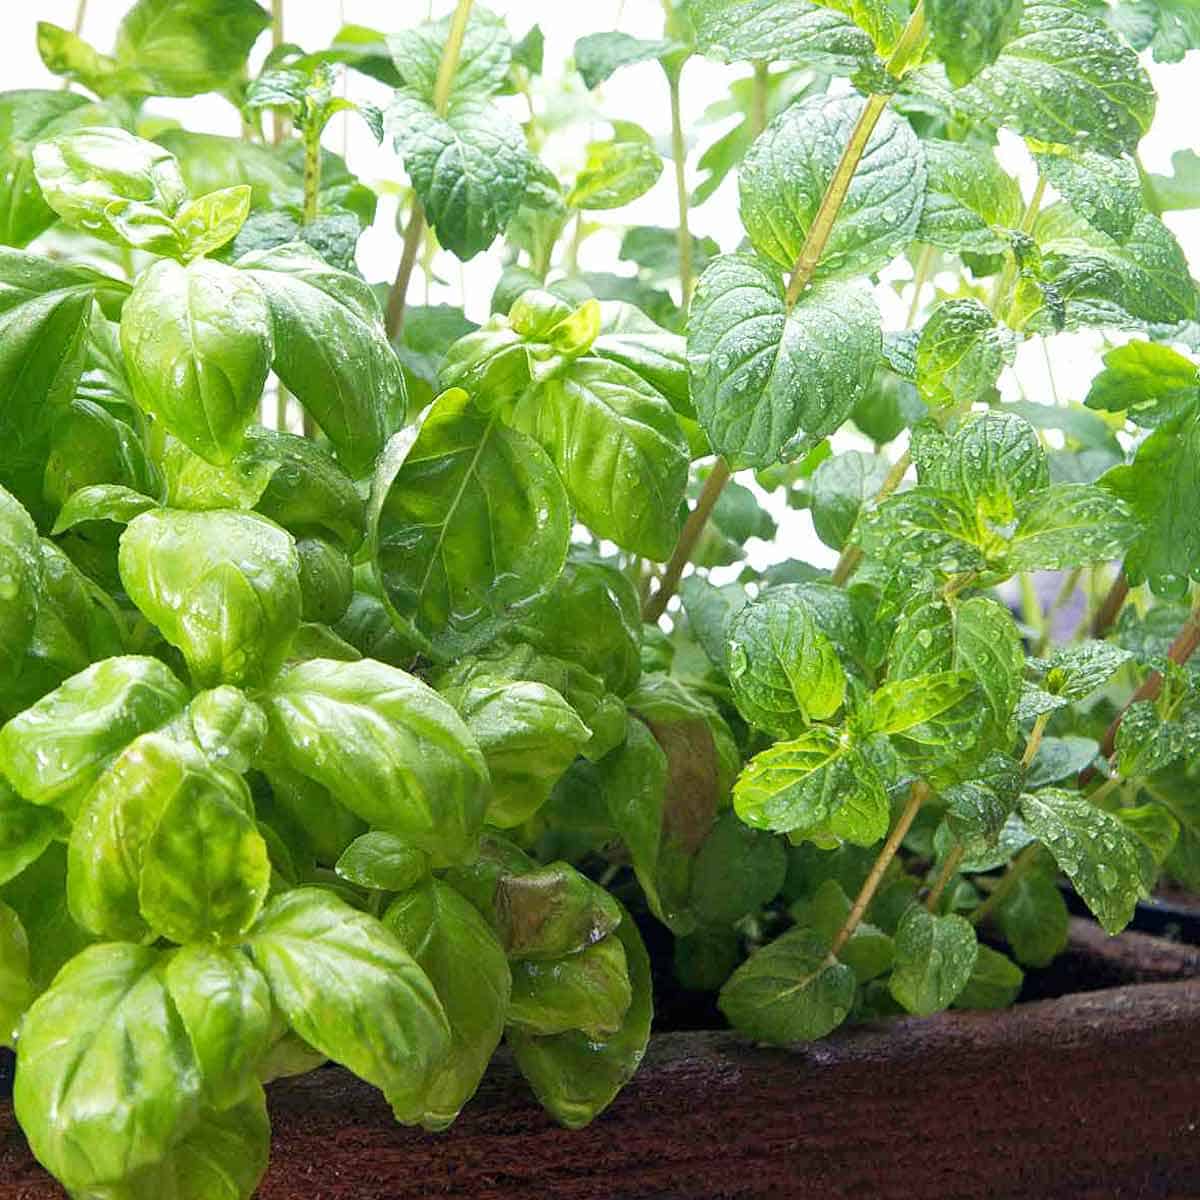 A fresh basil plant and a fresh mint plant in a pot.